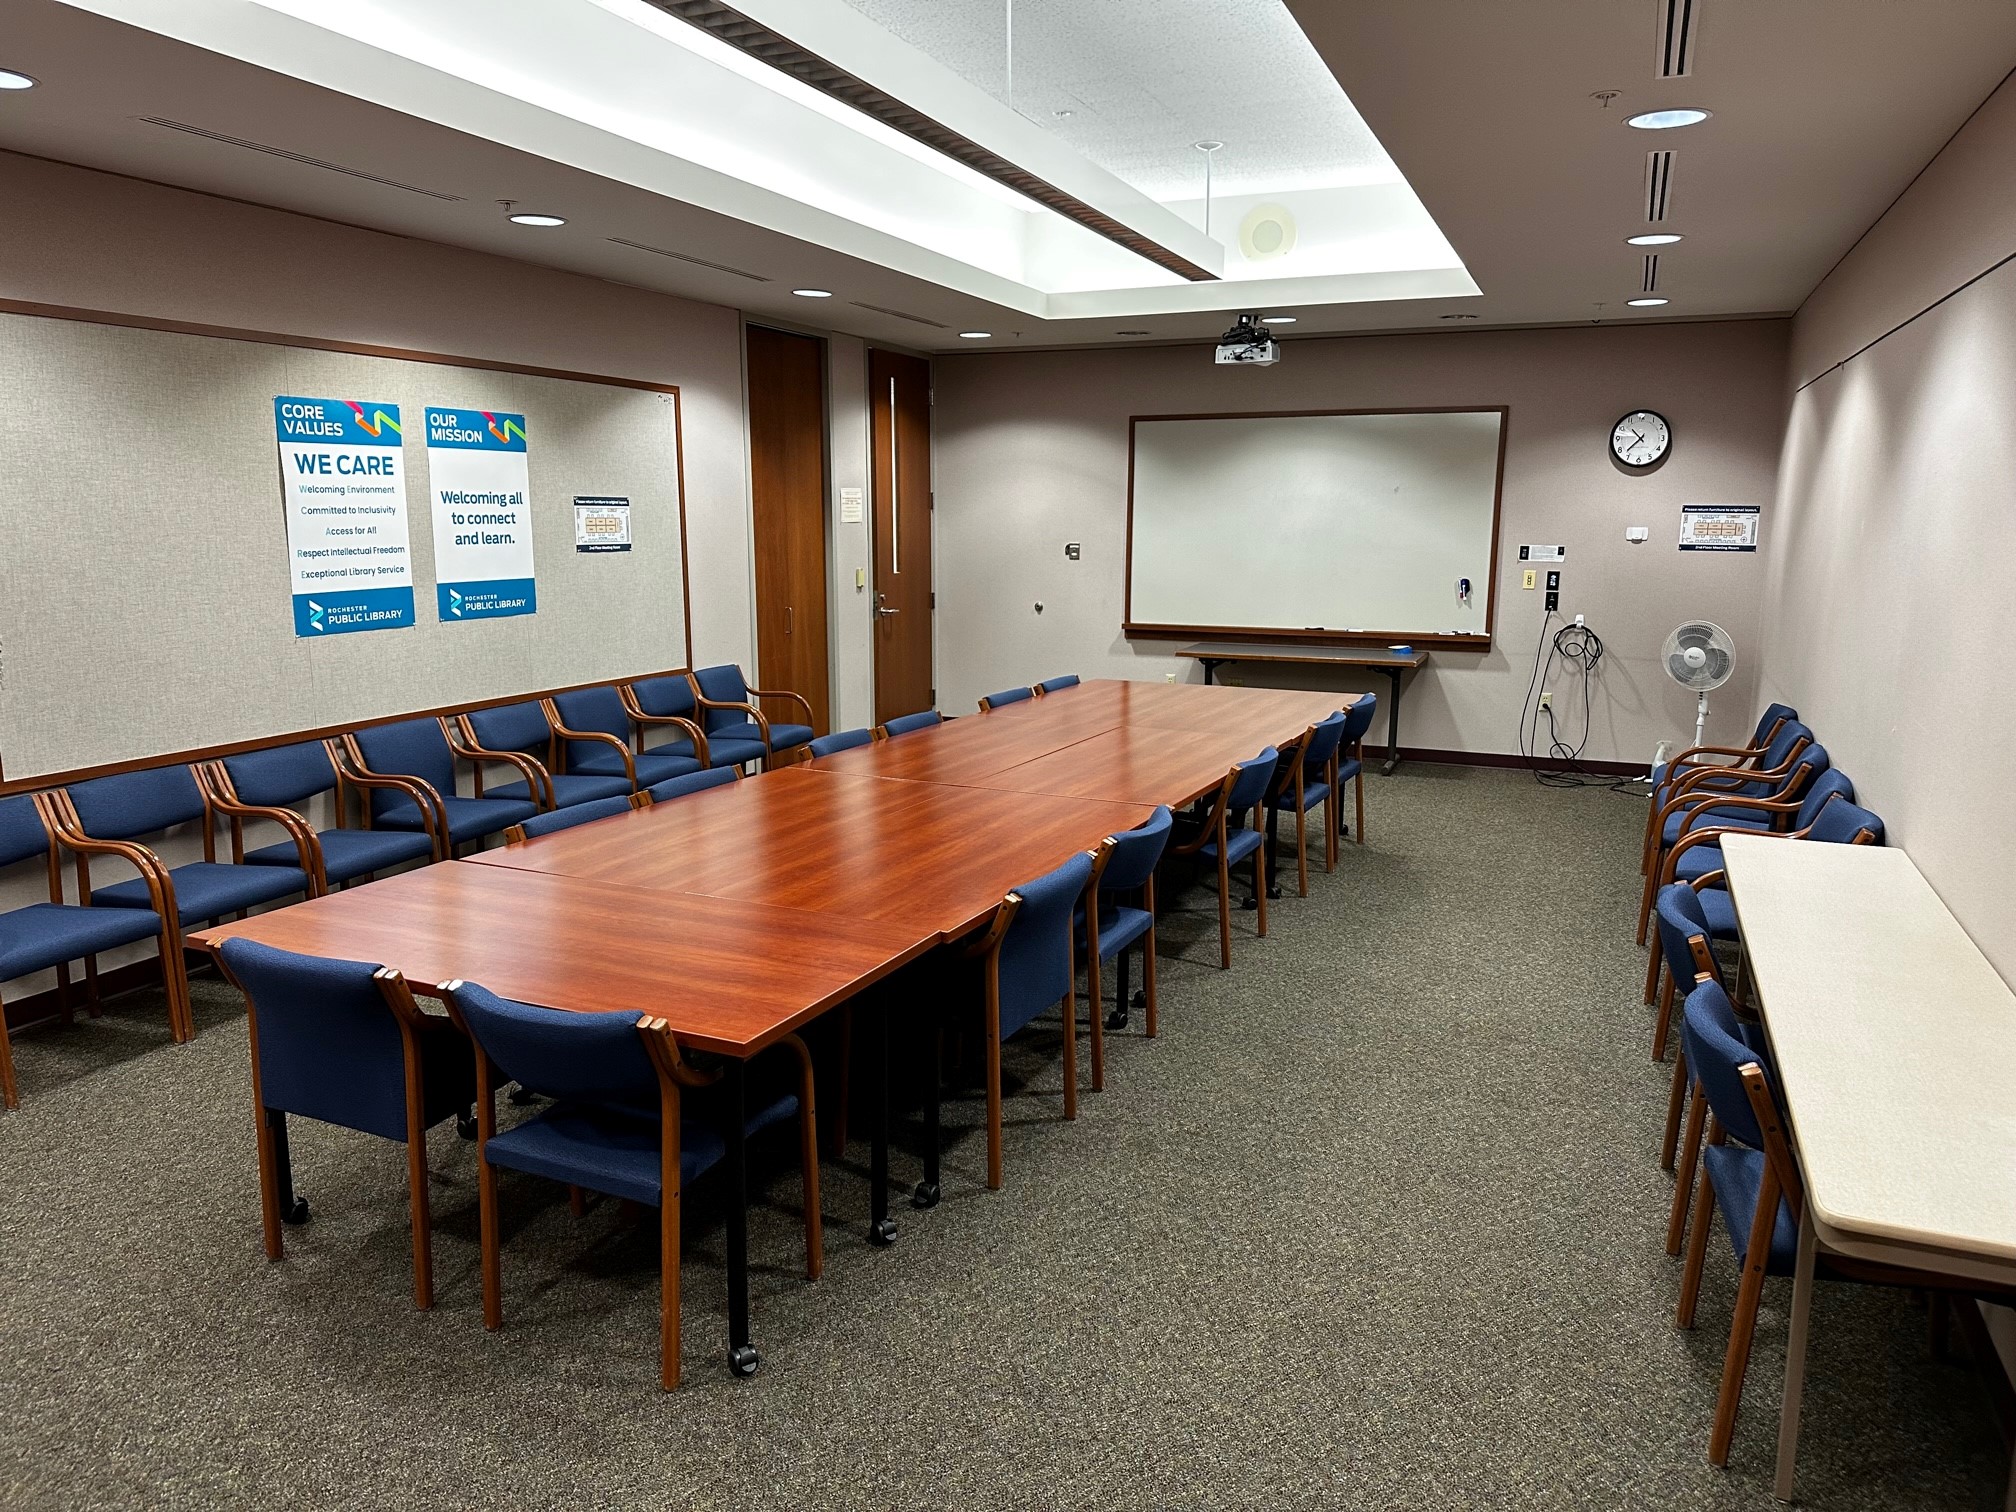 7 tables with chairs and a projector with white board